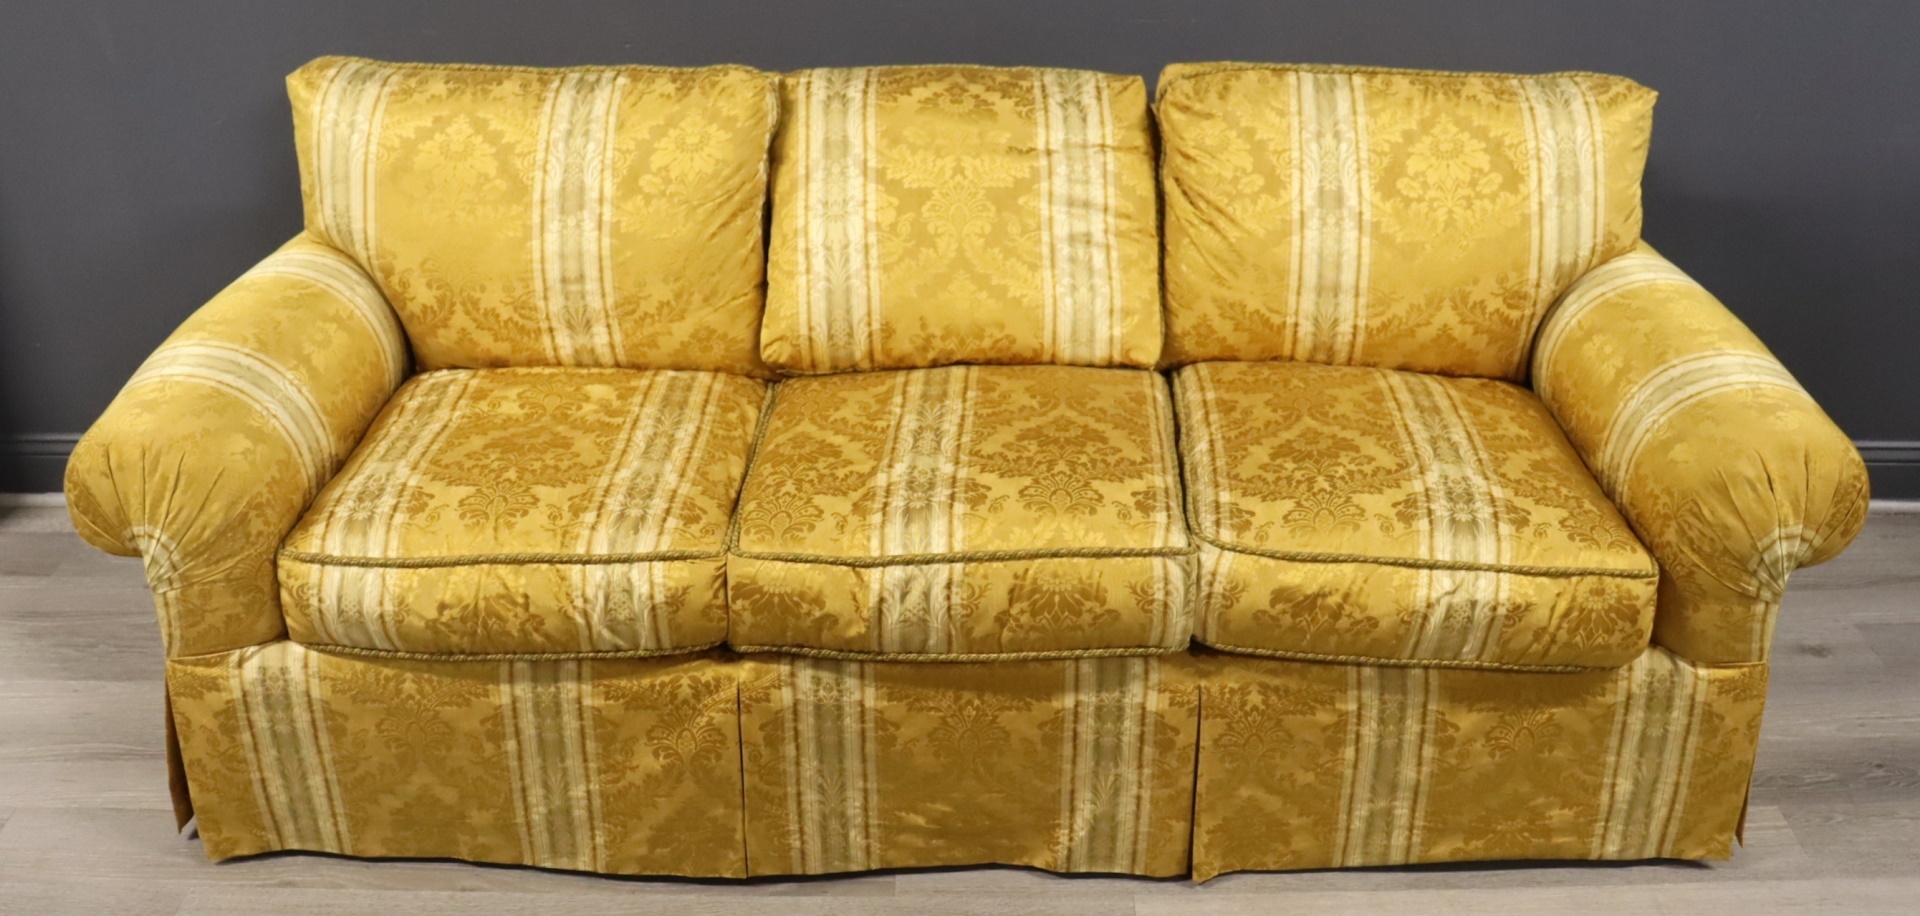 VINTAGE AND QUALITY SILK UPHOLSTERED